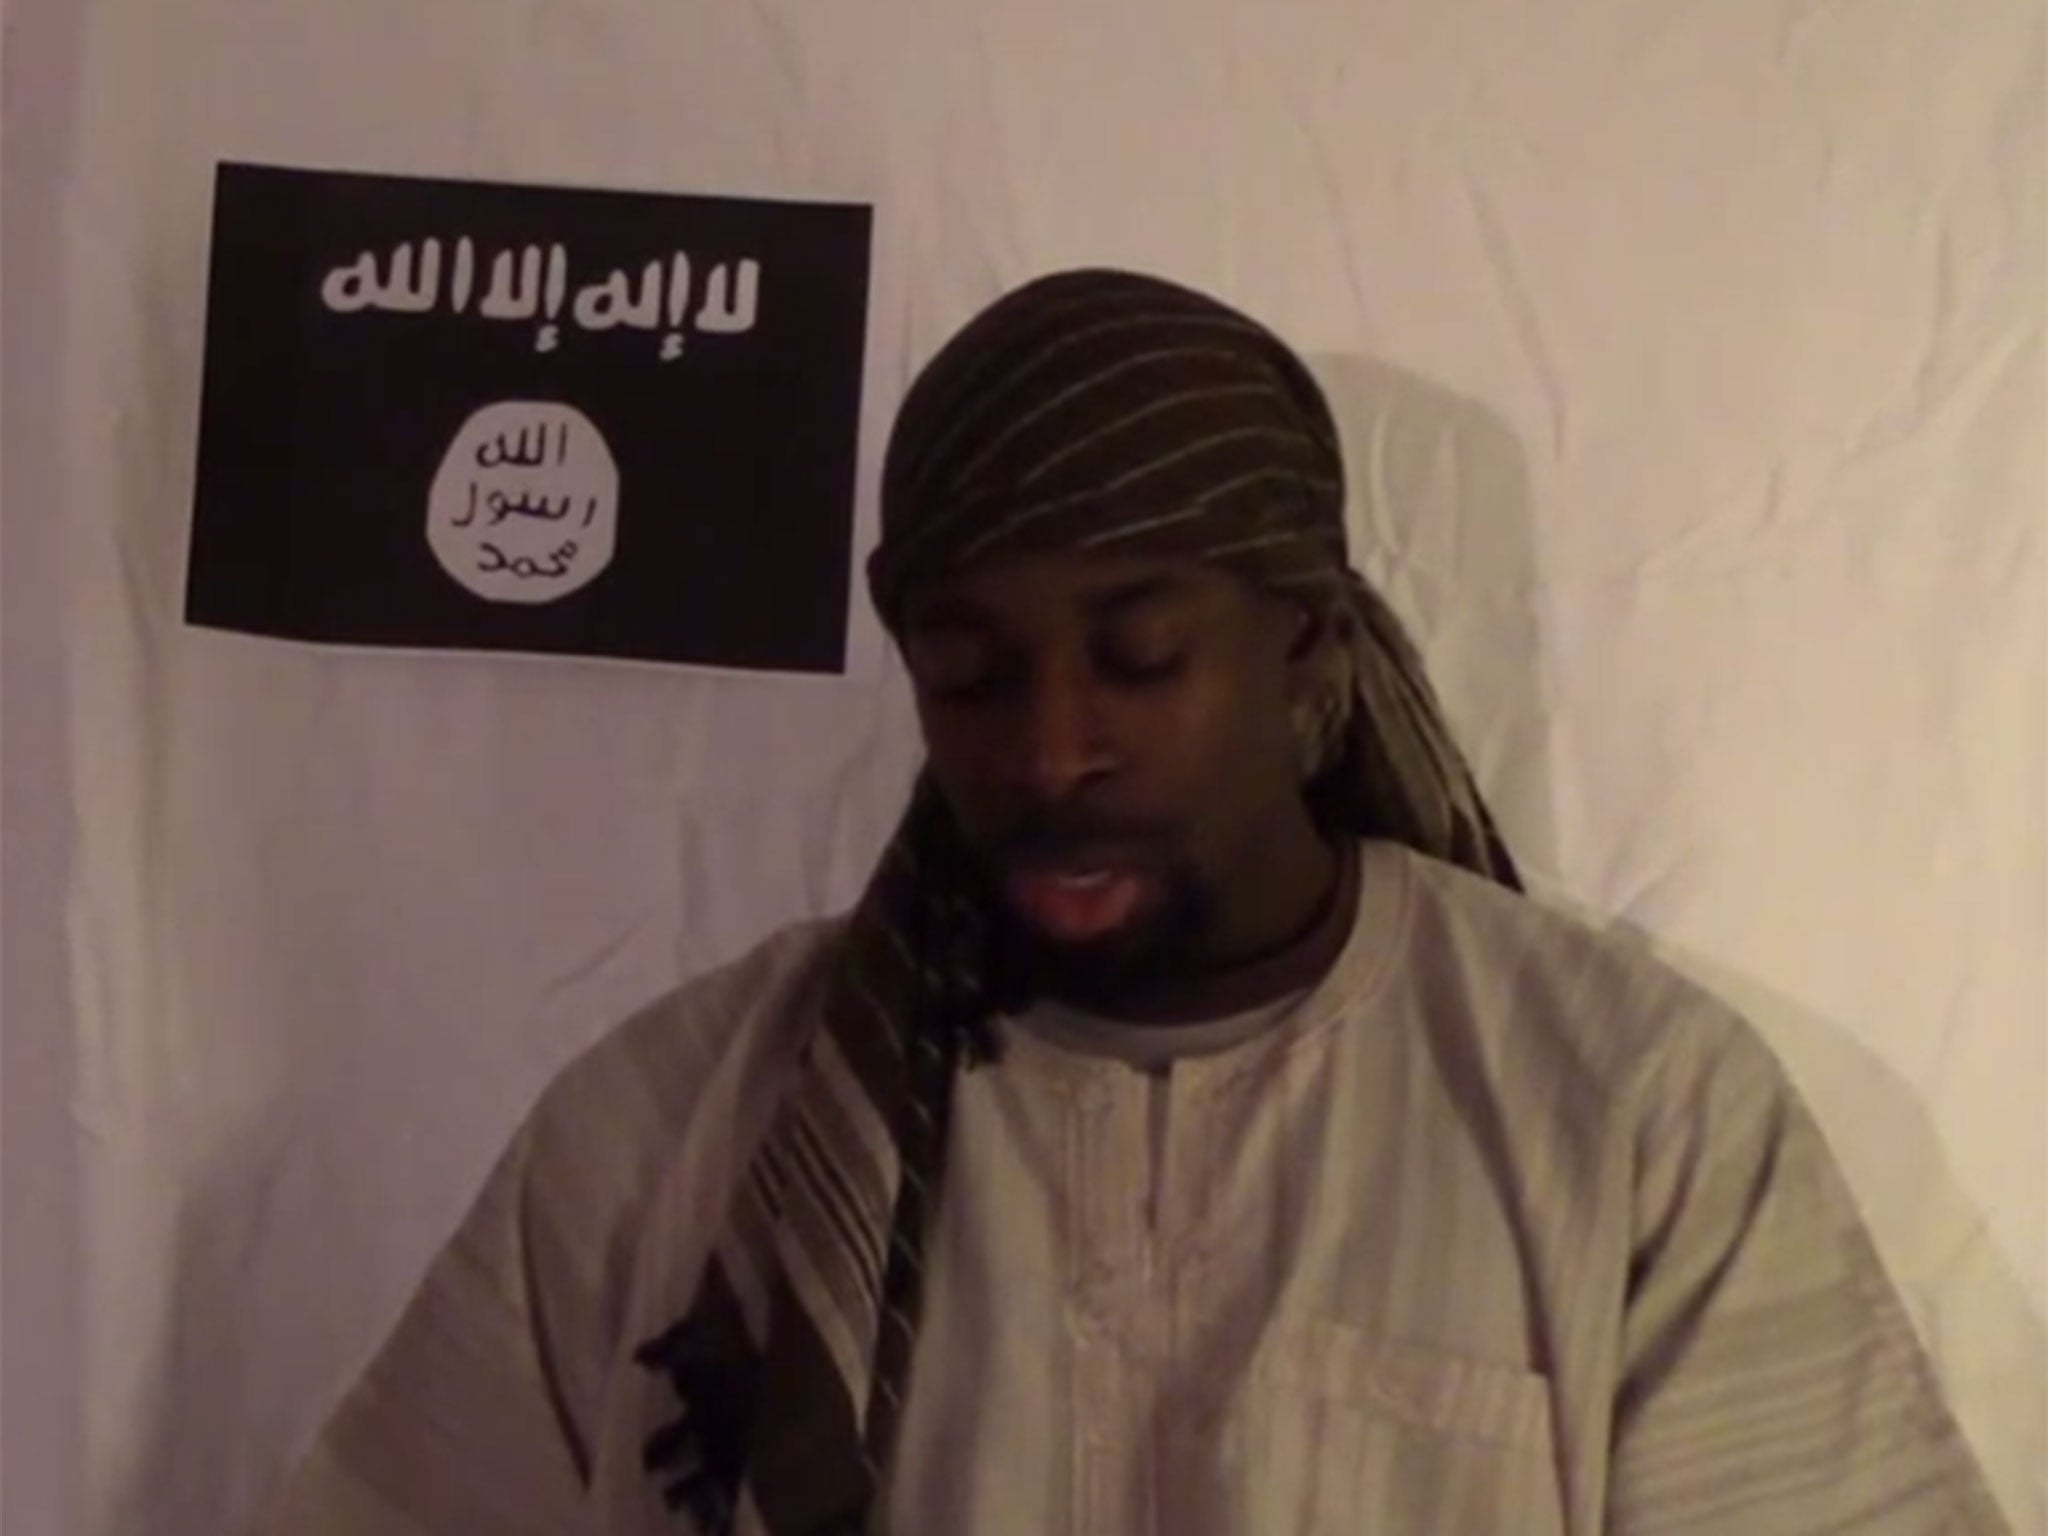 Coulibaly is purportedly shown reading from a piece of paper, pledging allegiance to Isis